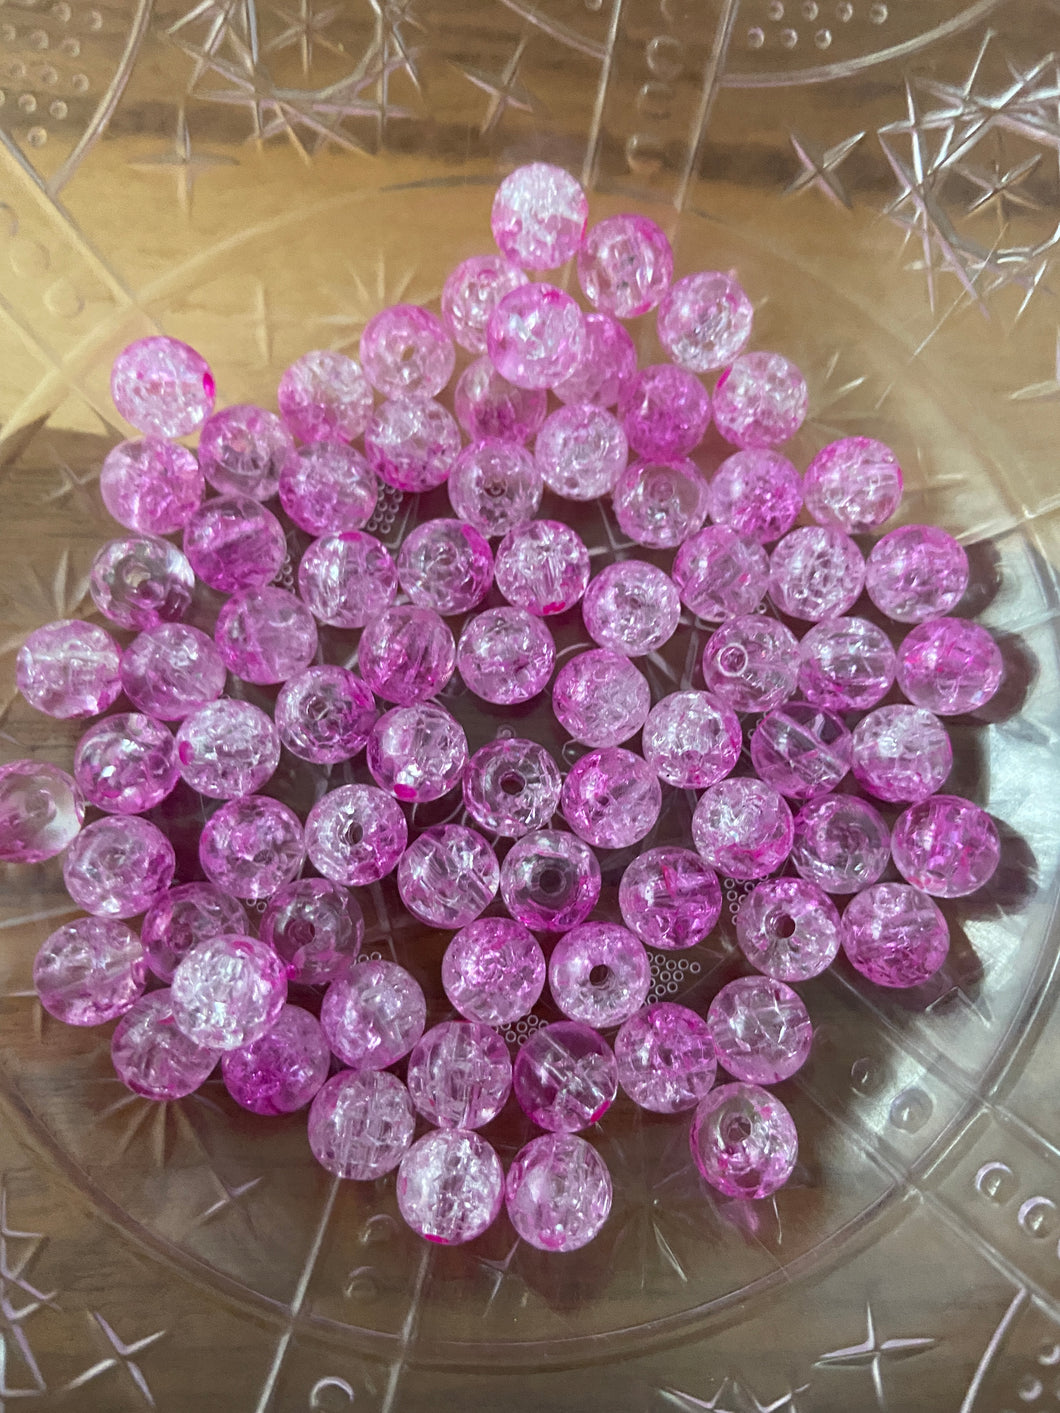 100 pcs 8mm Acrylic Cracked Crystal Beads - Pink Beads - For Jewelry Making